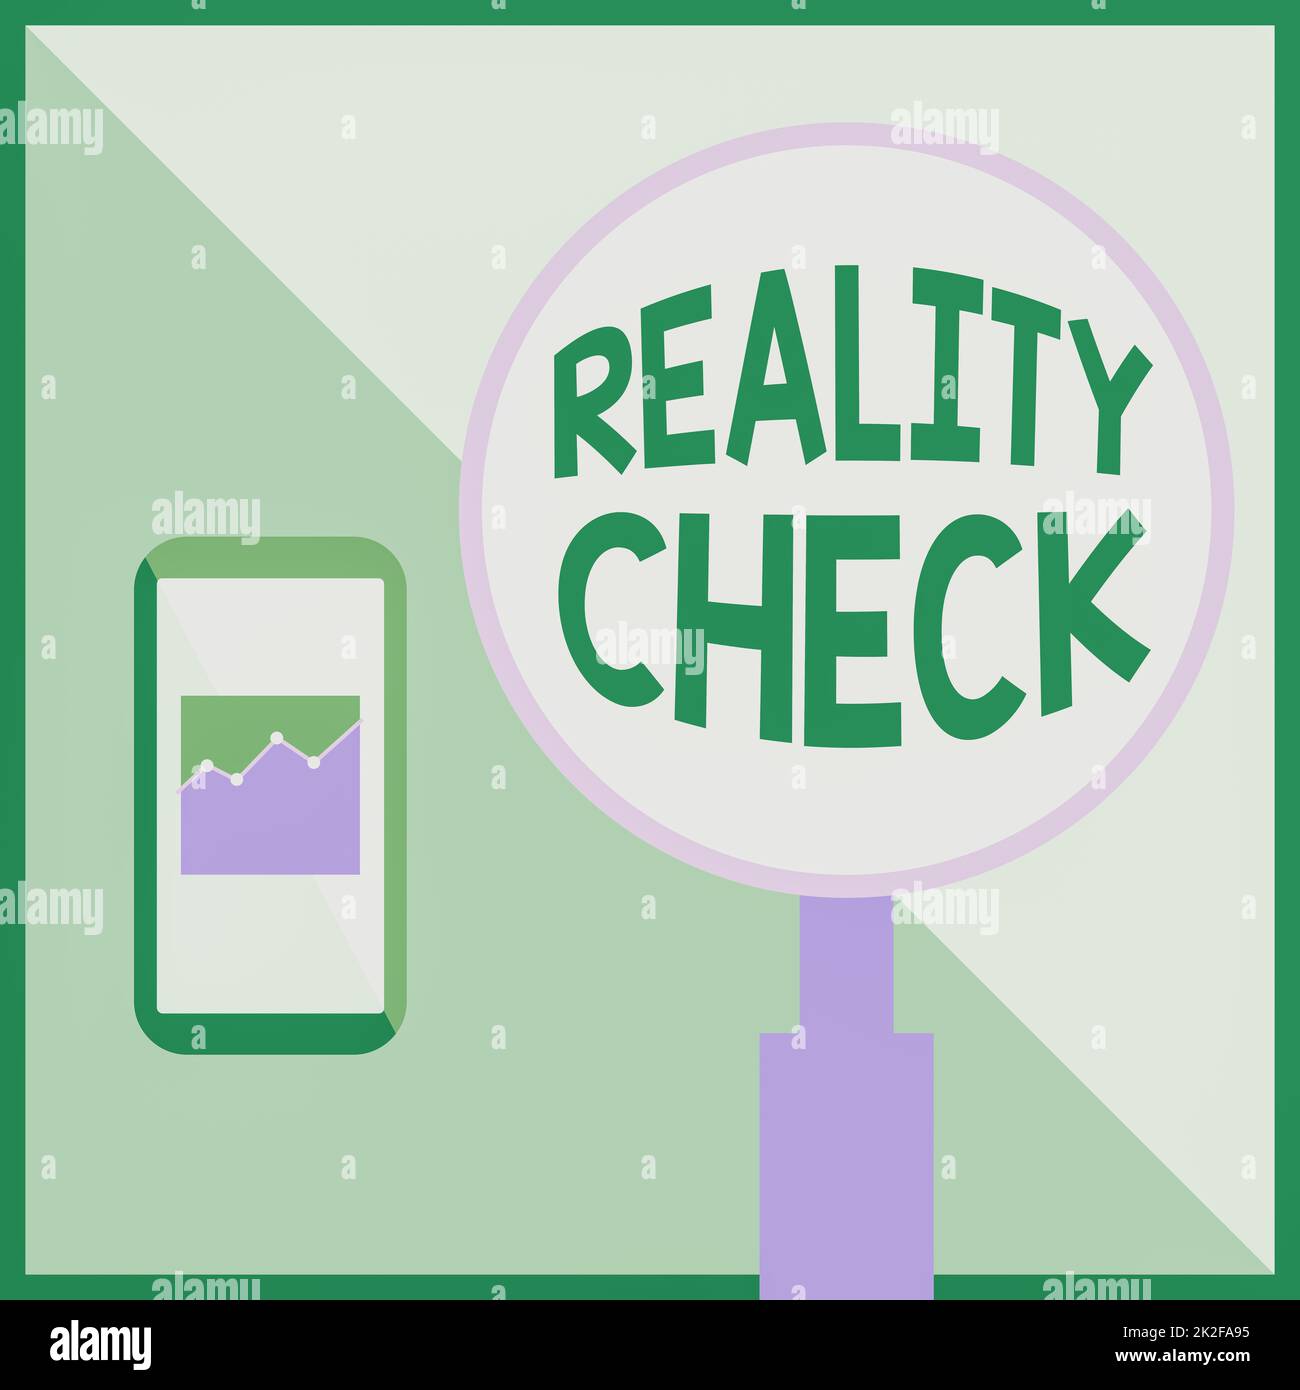 Writing displaying text Reality Check. Business concept one is reminded of the state of things in the real world Illustration Of Active Smartphone Beside A Large Magnifying Glass. Stock Photo